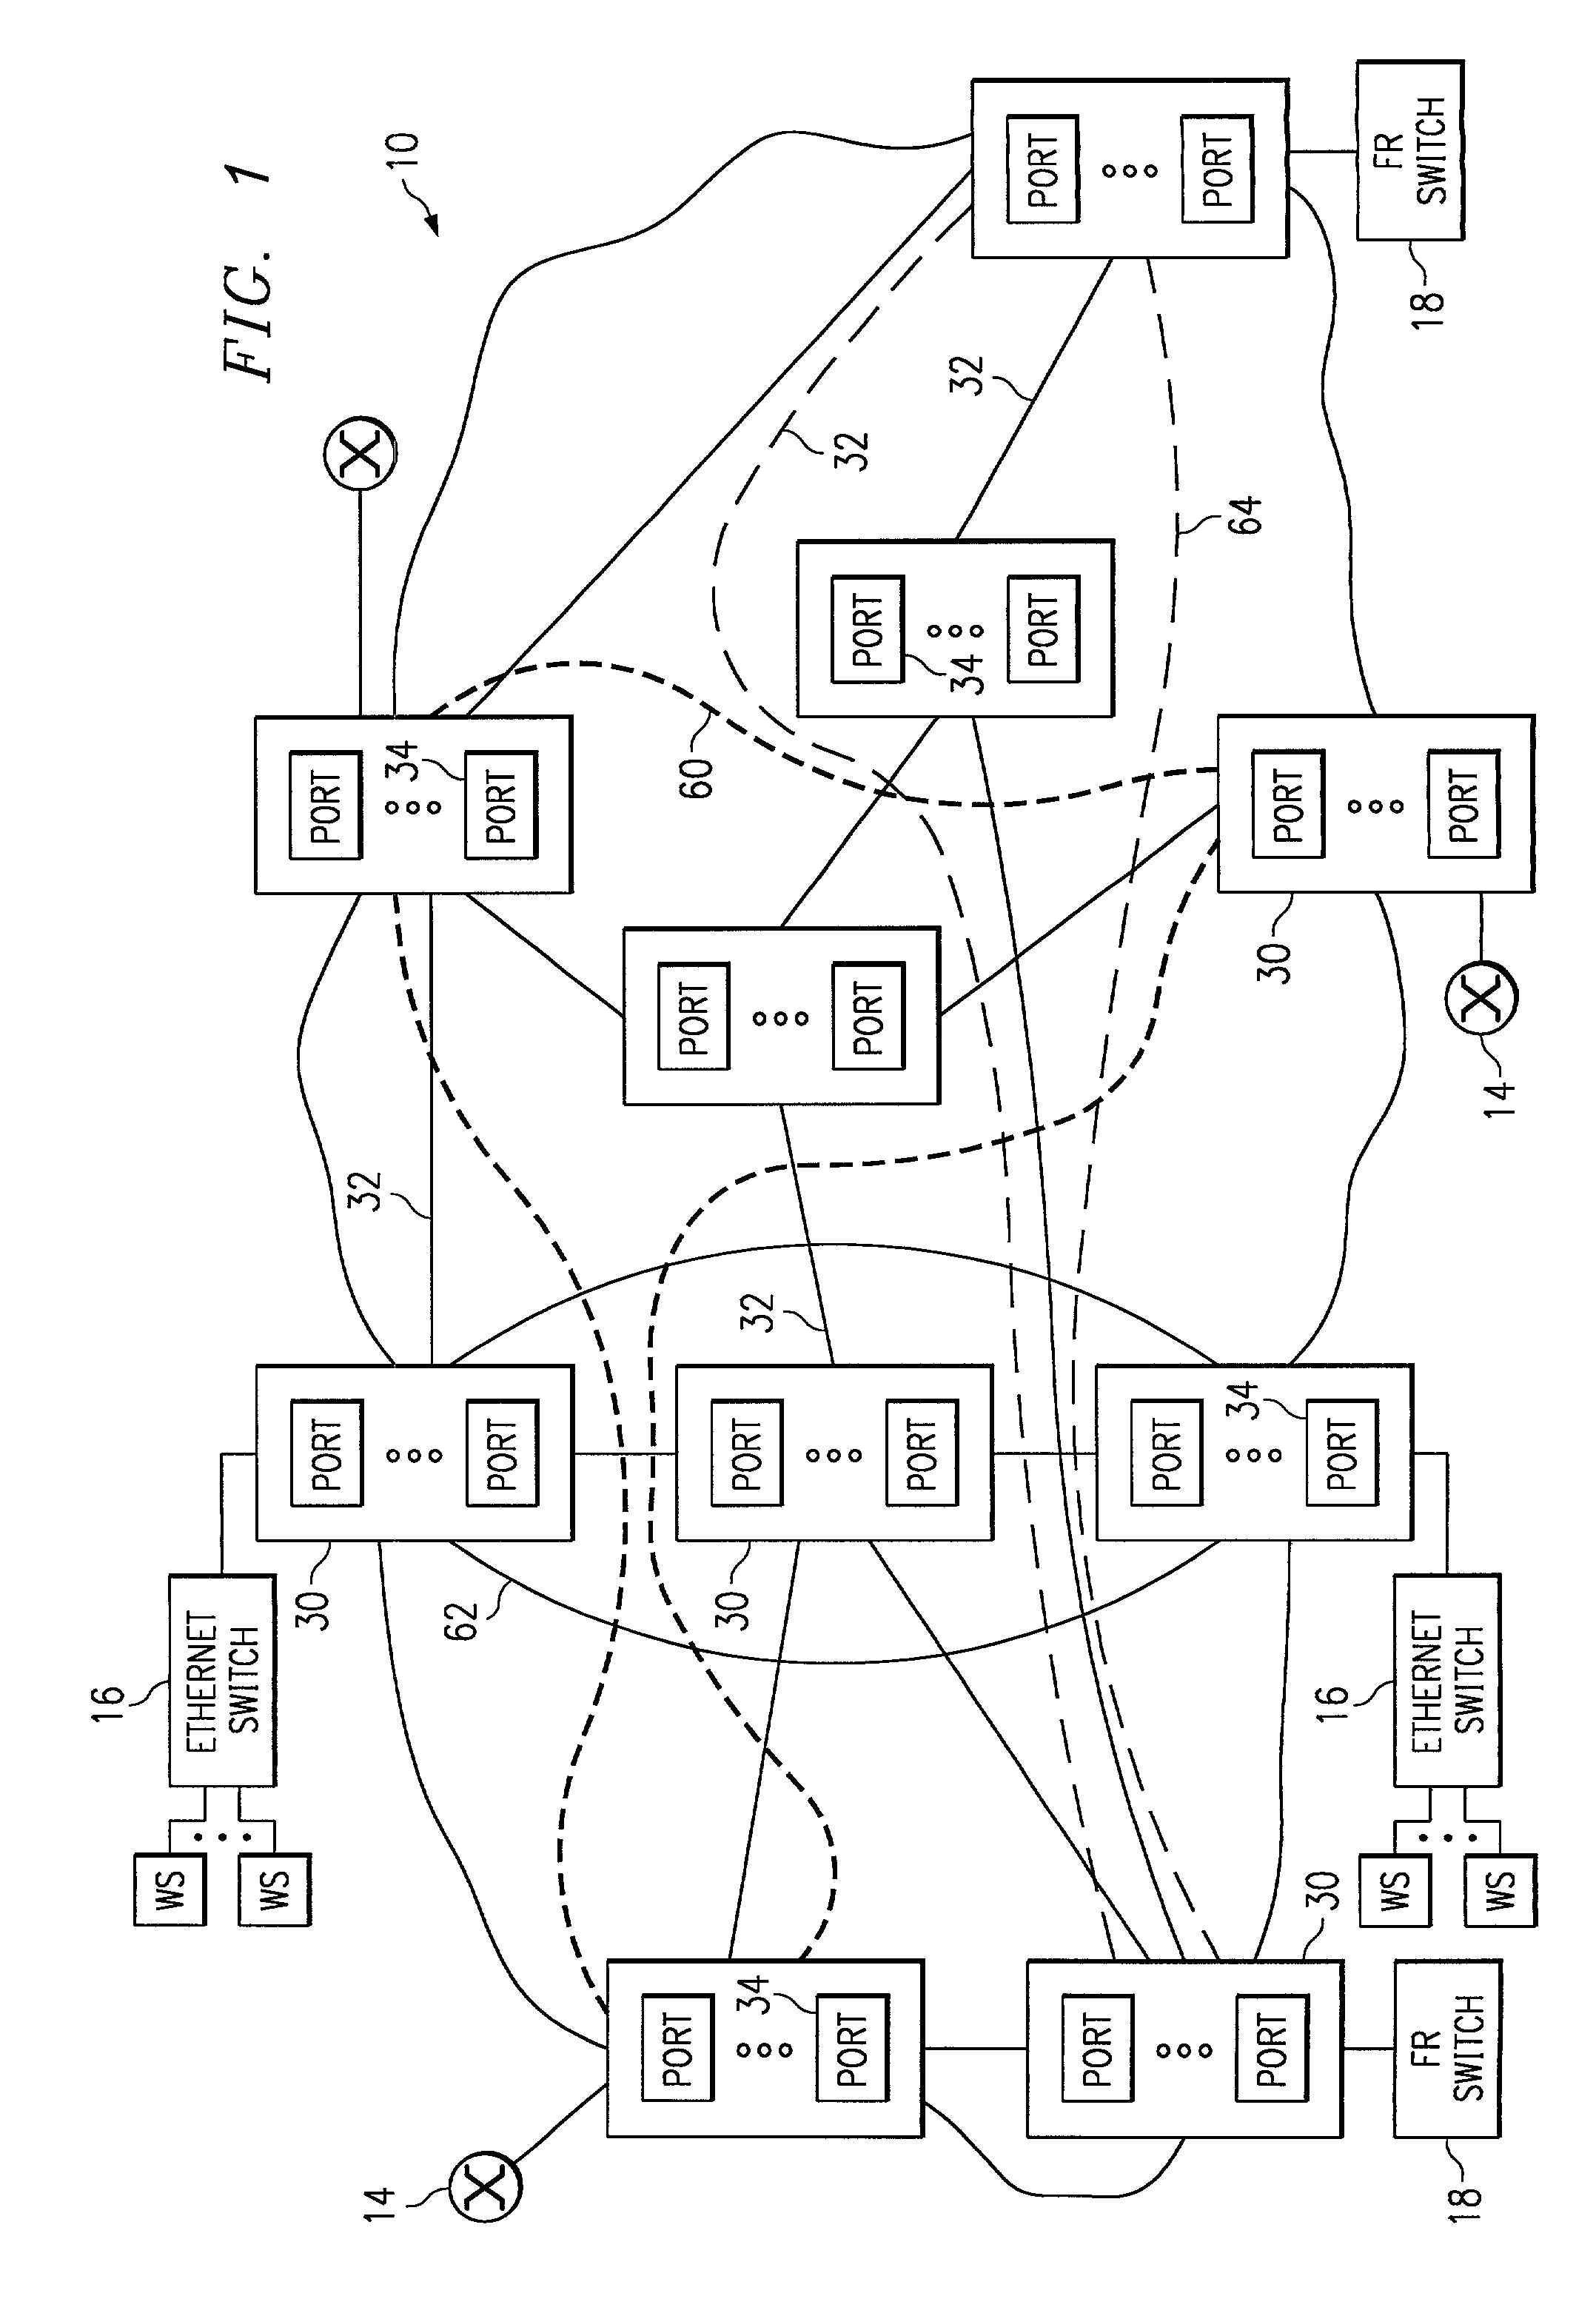 Method and system for quality of service (QoS) support in a packet-switched network